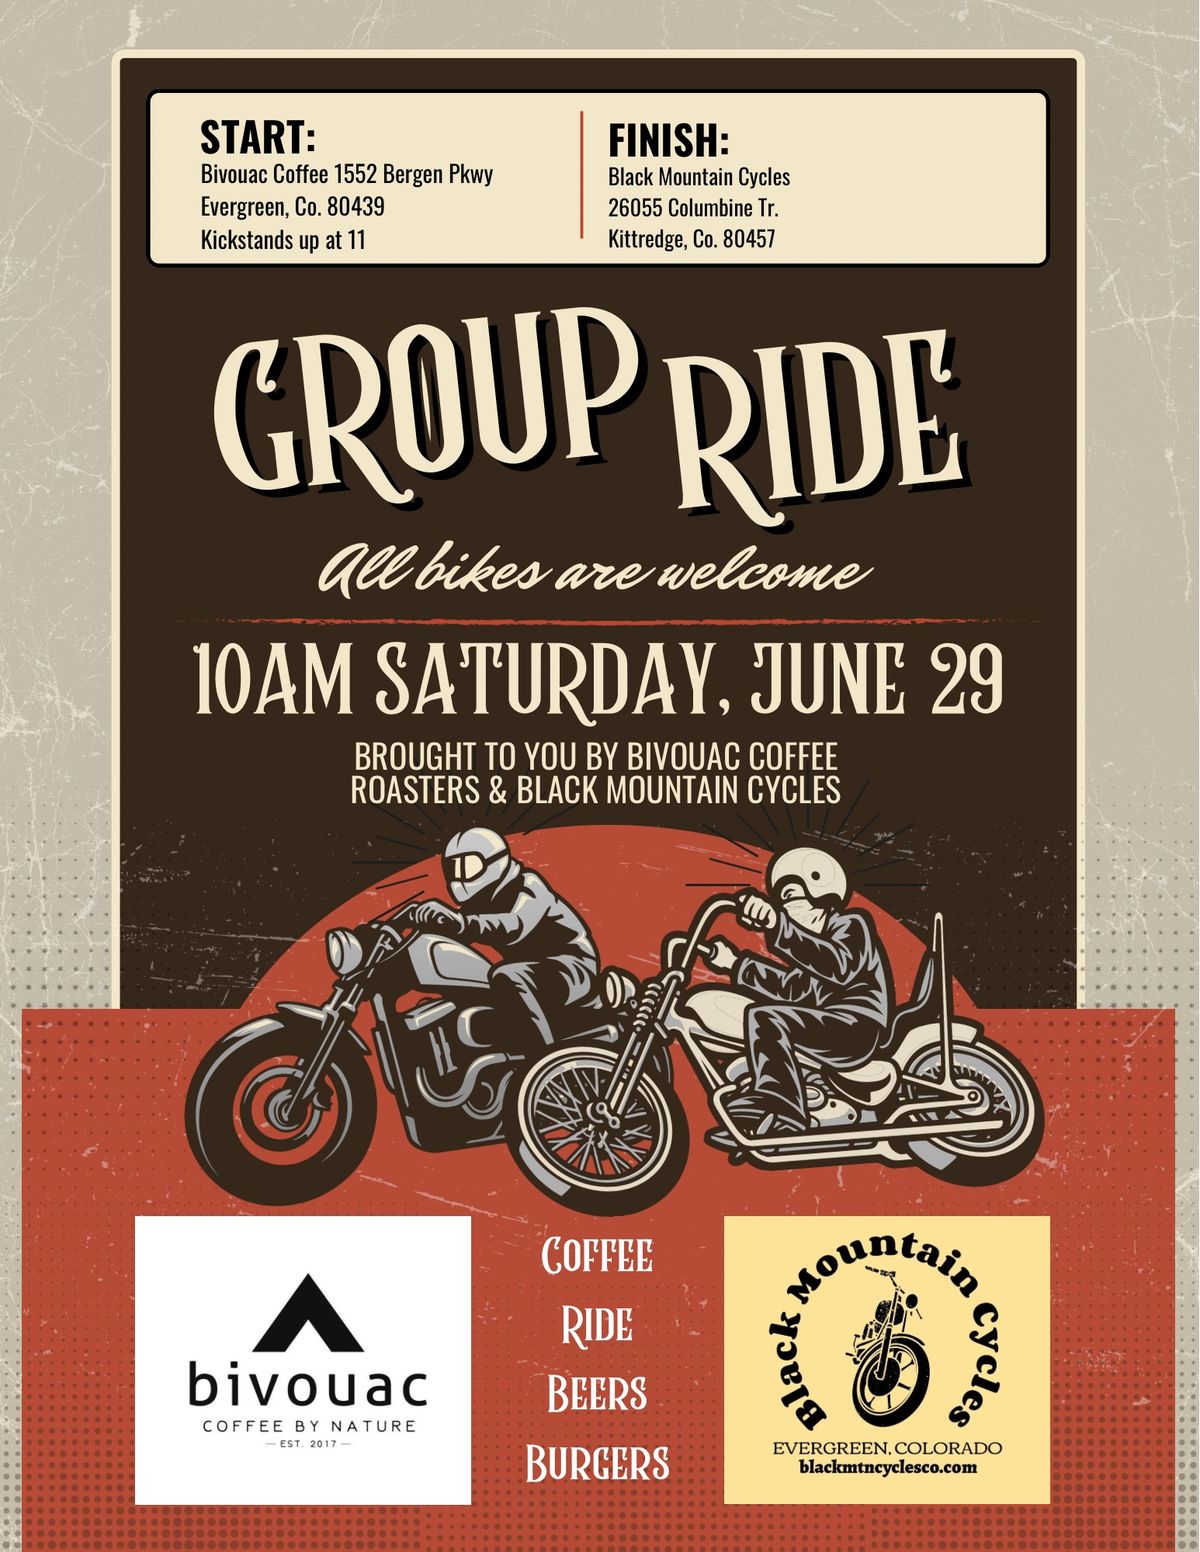 Foothills Ride and BBQ